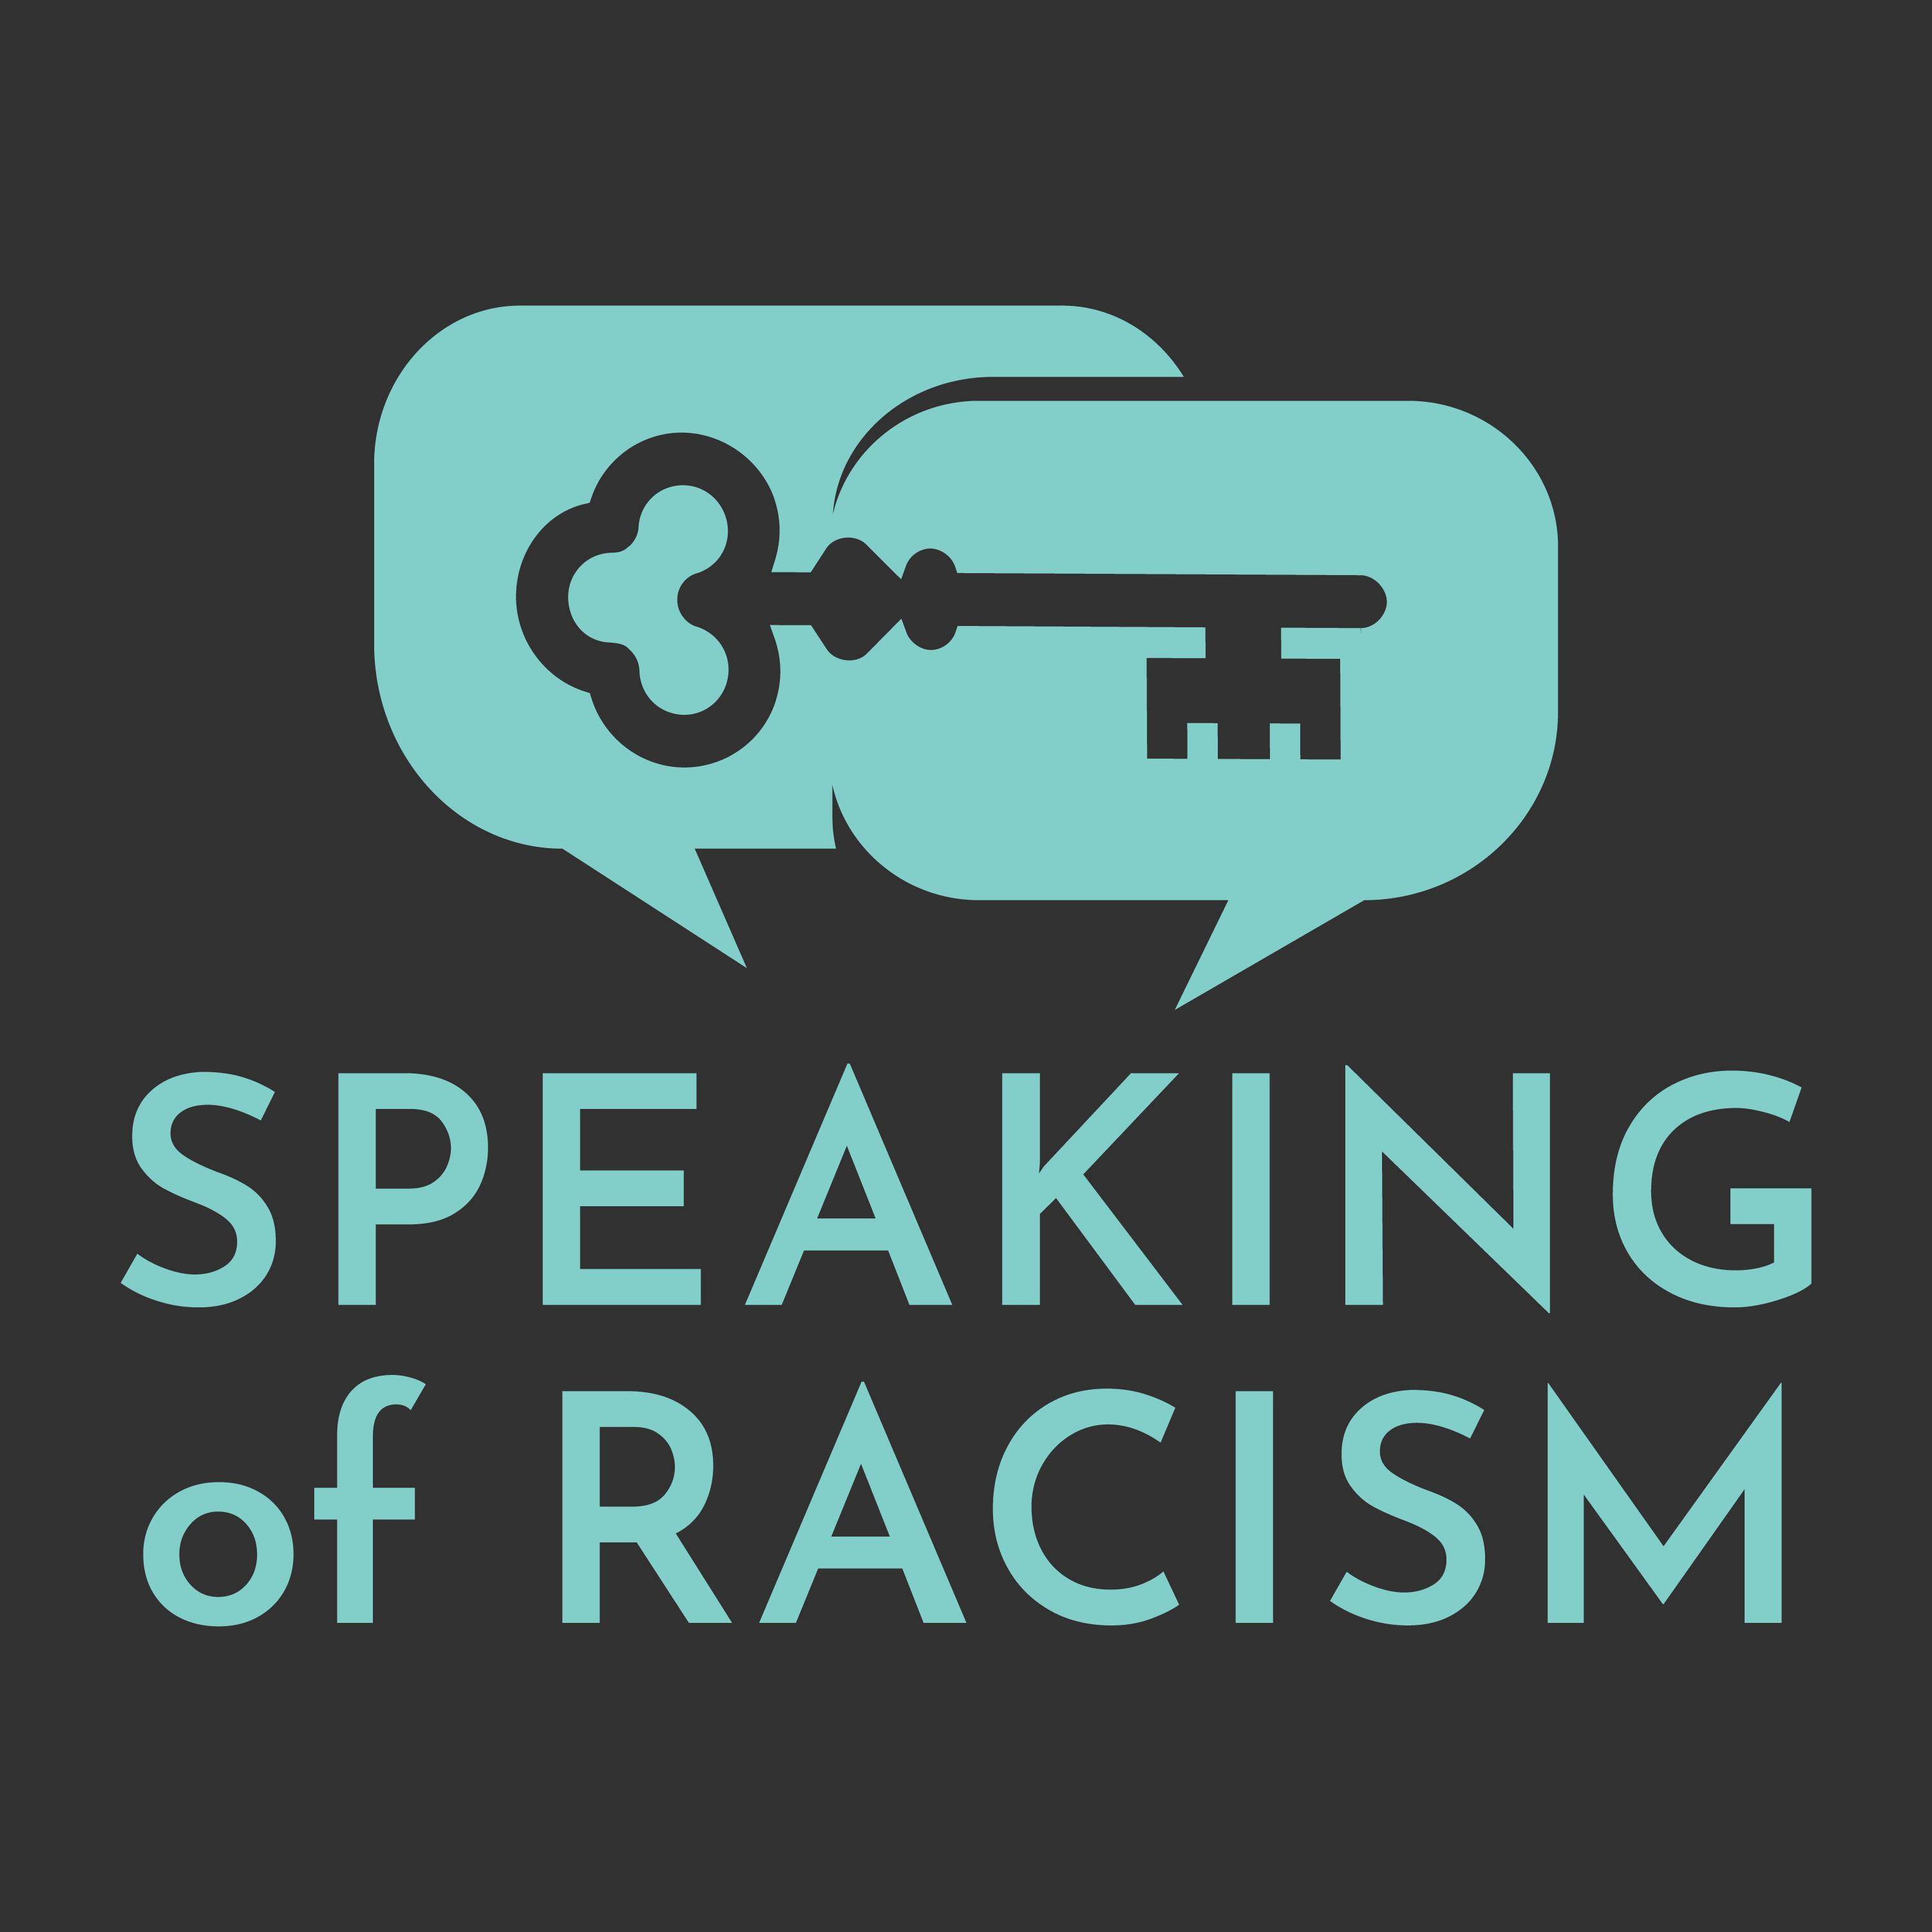 Podcast: Speaking of Racism